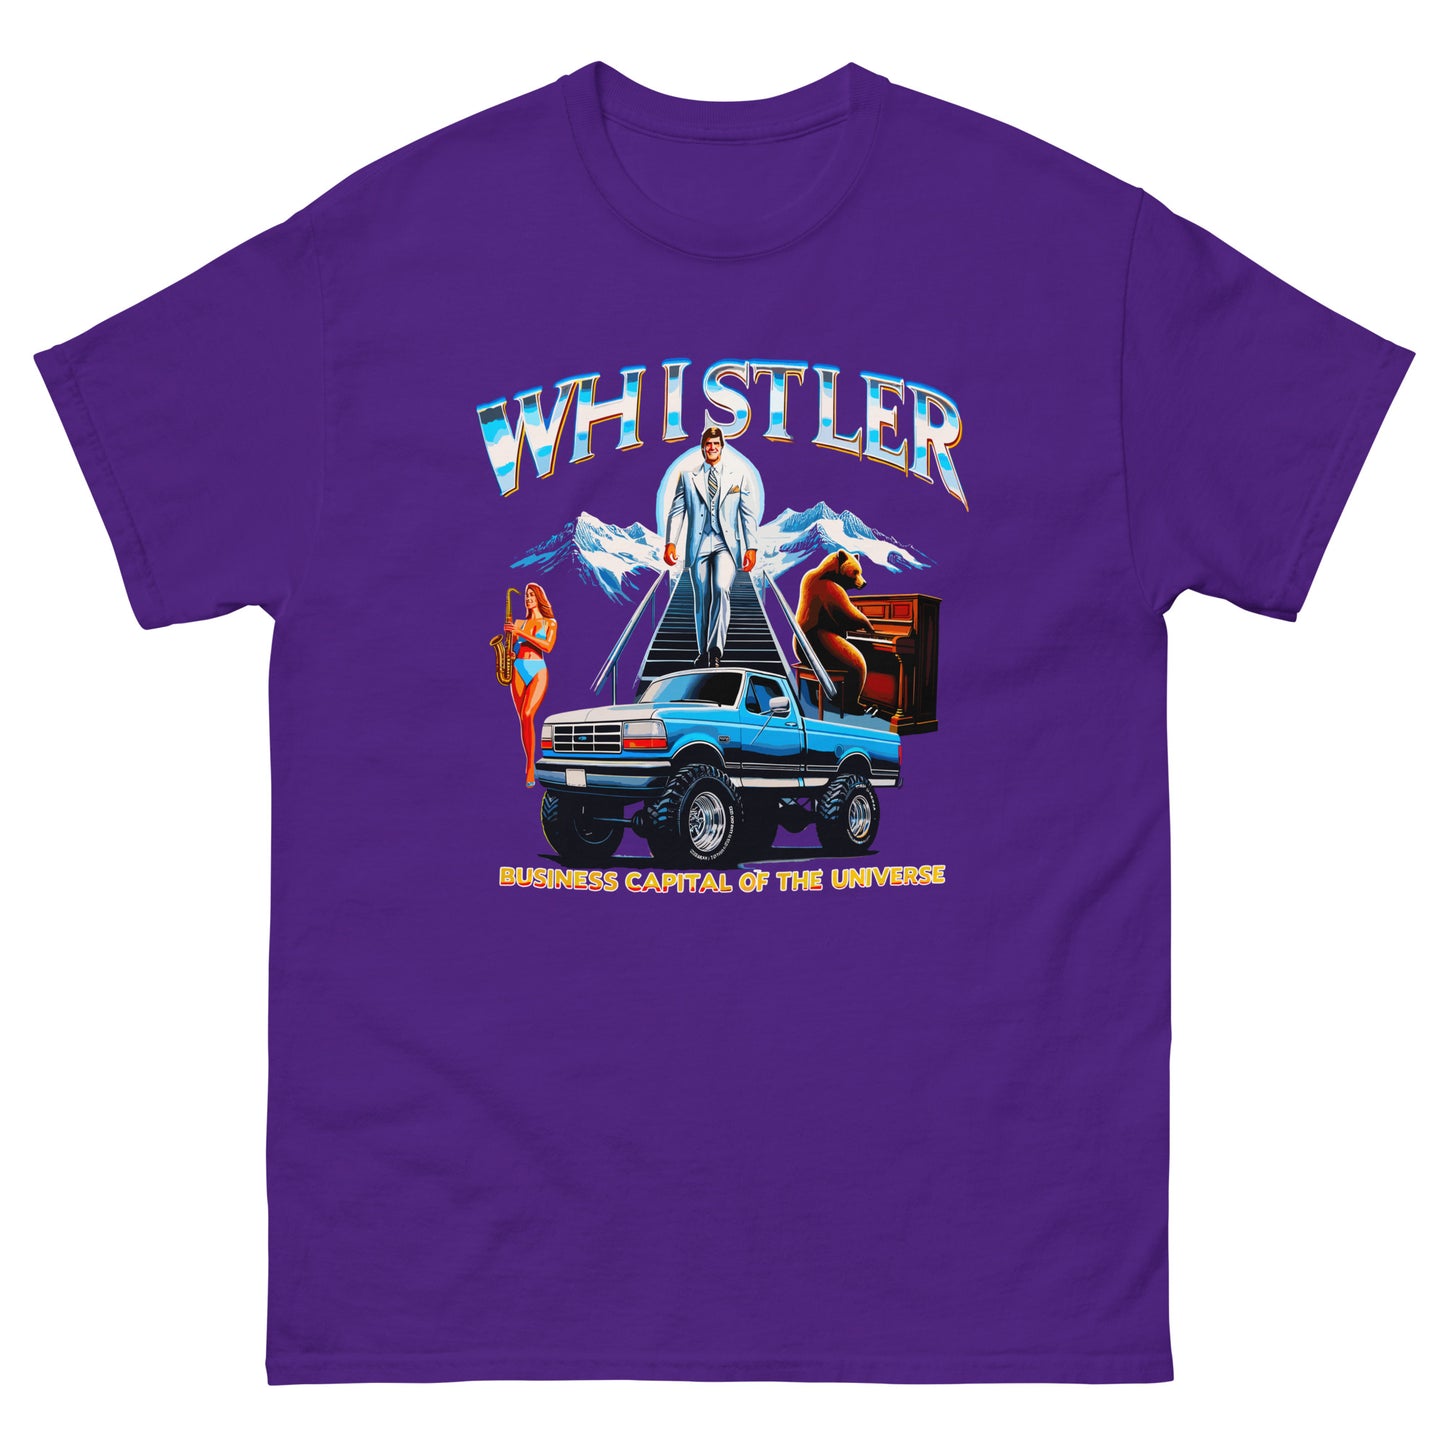 Whistler Business Capital of the Universe T-shirt printed by Whistler Shirts